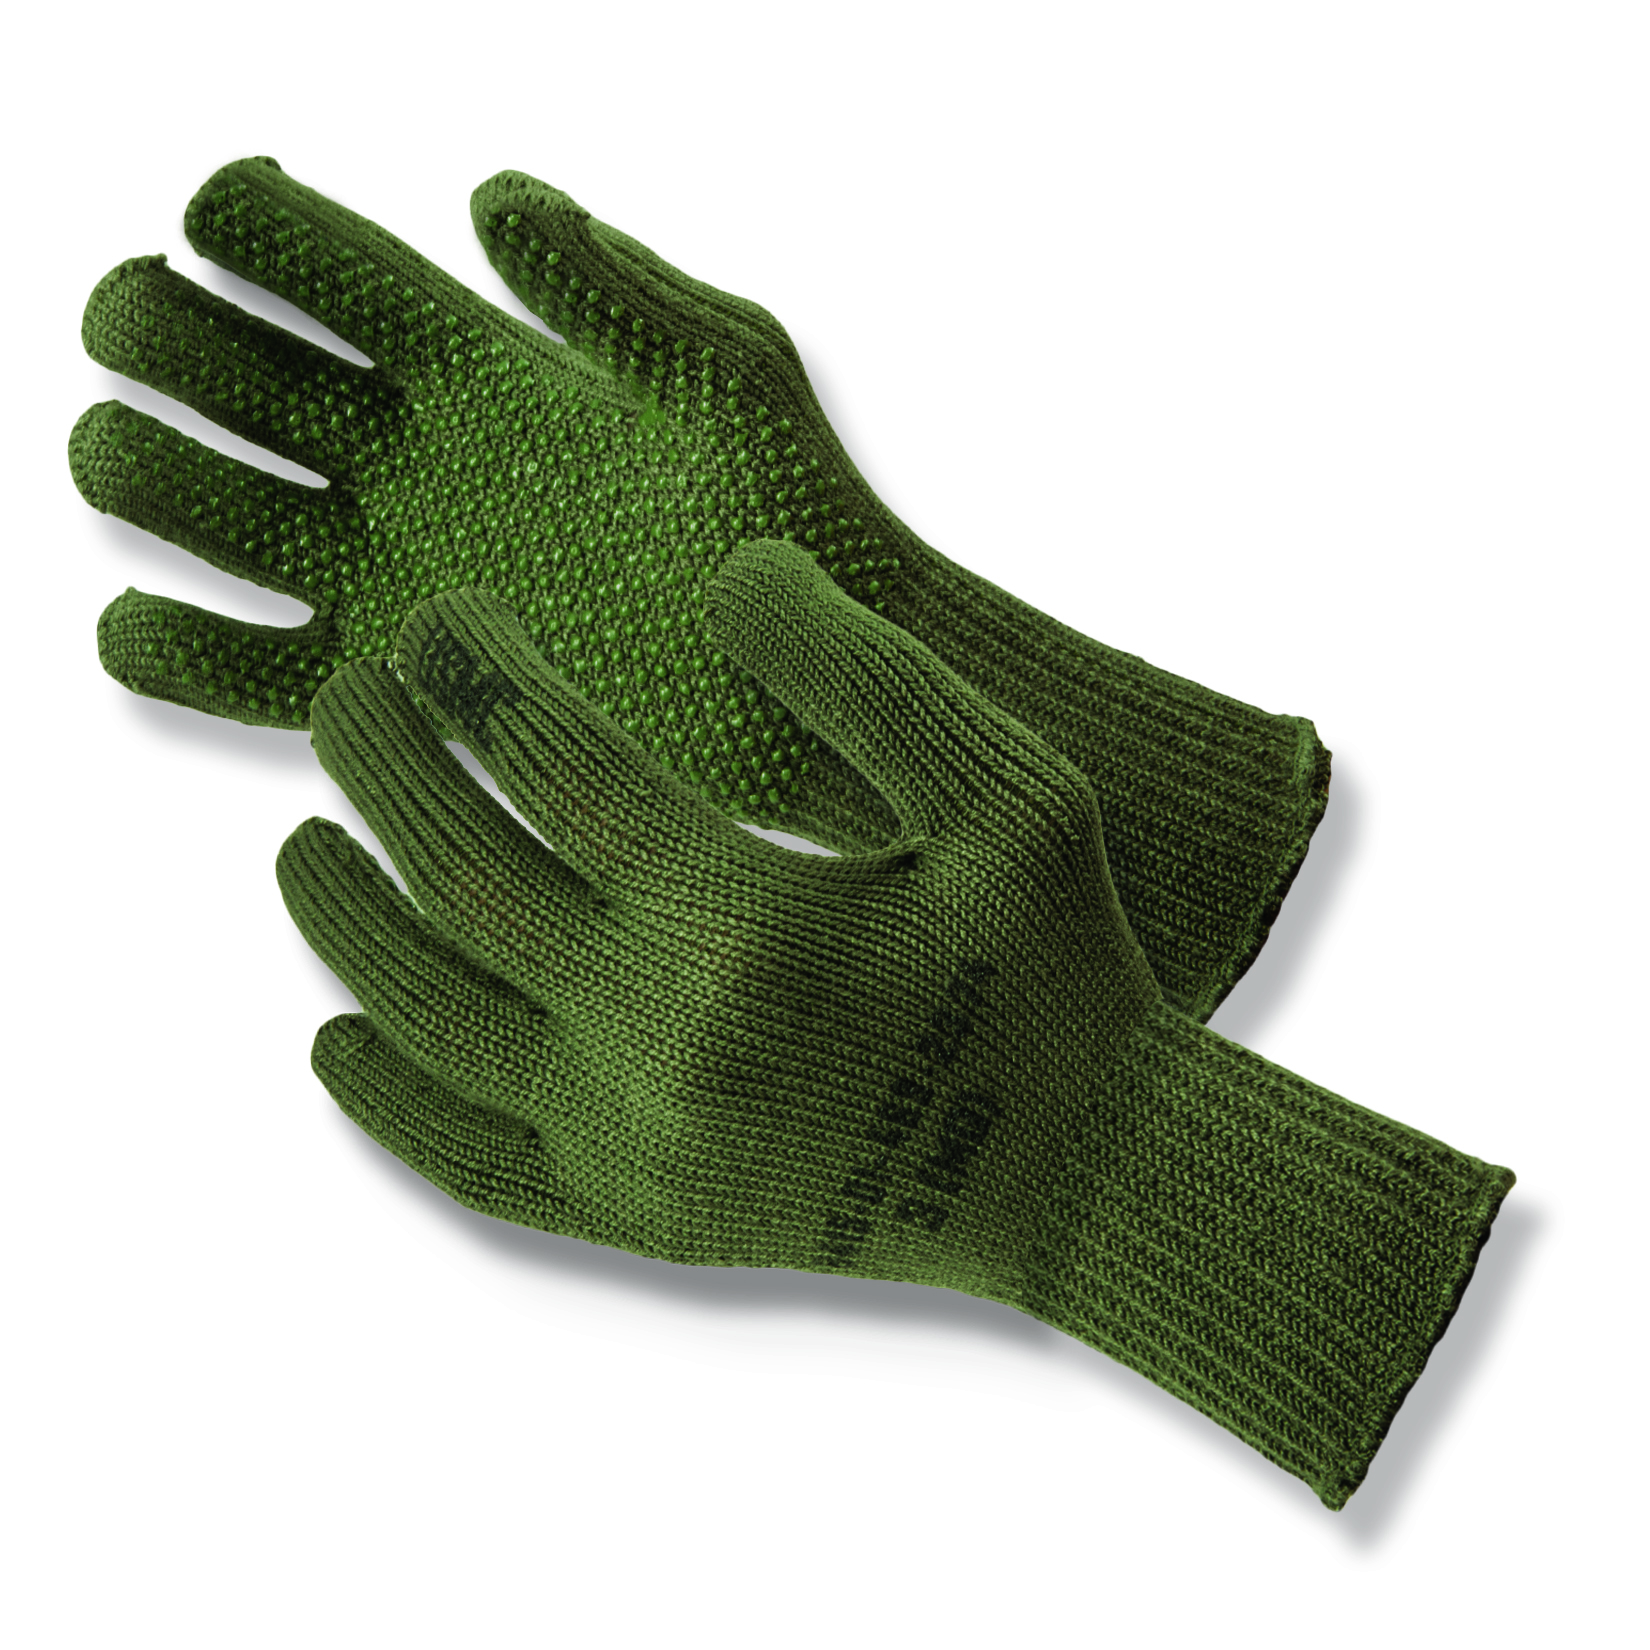 Made in USA. USMC-40™ medium weight polyester/lycra string knit gloves with gripper dots